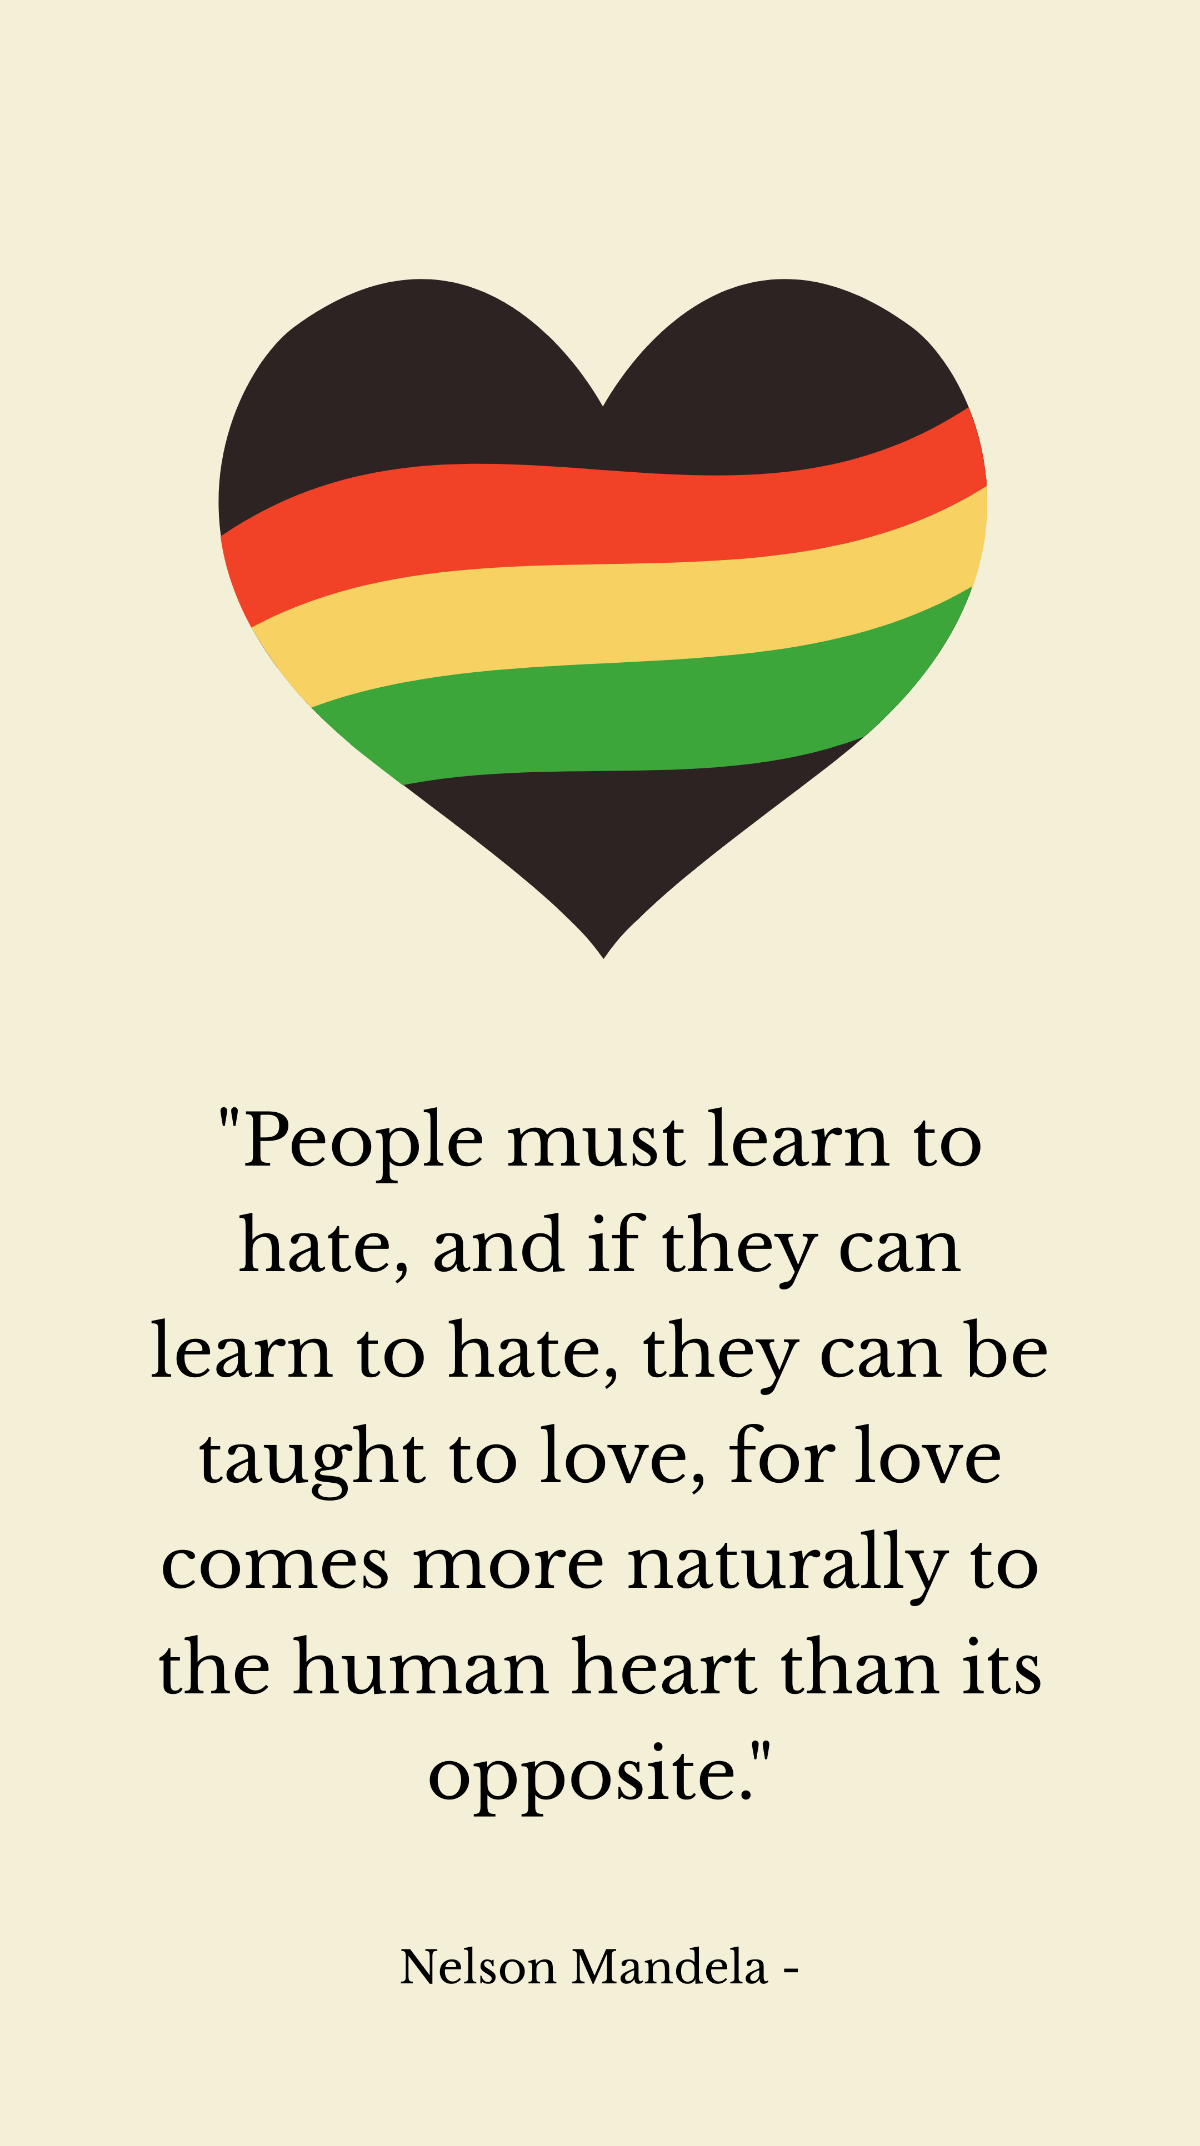 Nelson Mandela - People must learn to hate, and if they can learn to hate, they can be taught to love, for love comes more naturally to the human heart than its opposite. Template